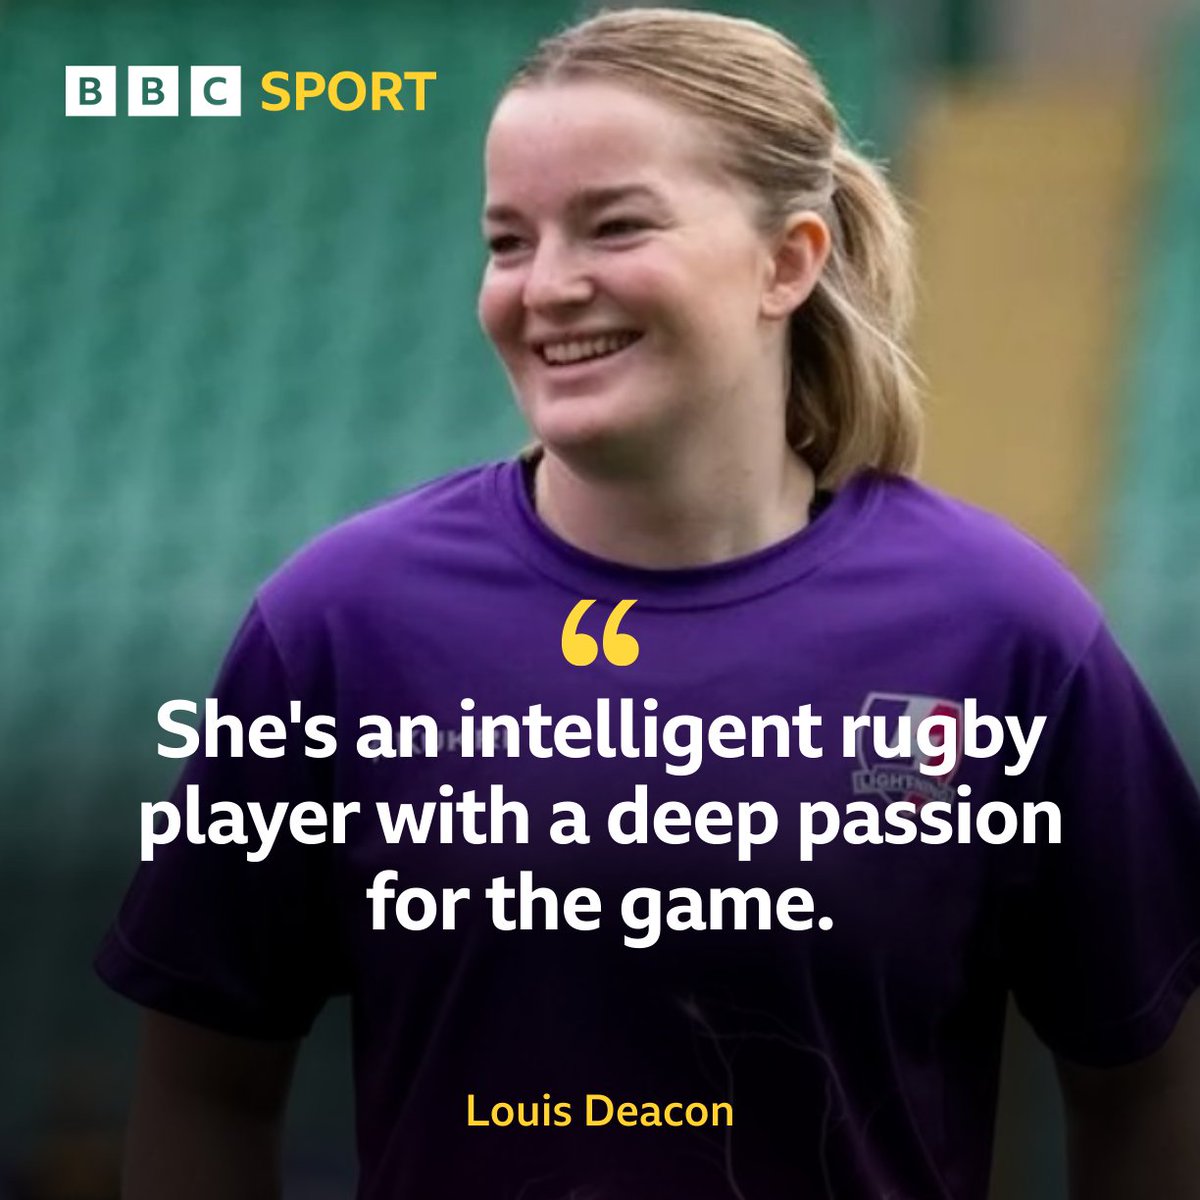 'It will be a special moment to see her run out.'

@Daisyhj1 is set to make her England debut against Australia on Friday.

The @LightningRugby forward and @SaintsRugby community coach has been named on the bench by head coach Louis Deacon.